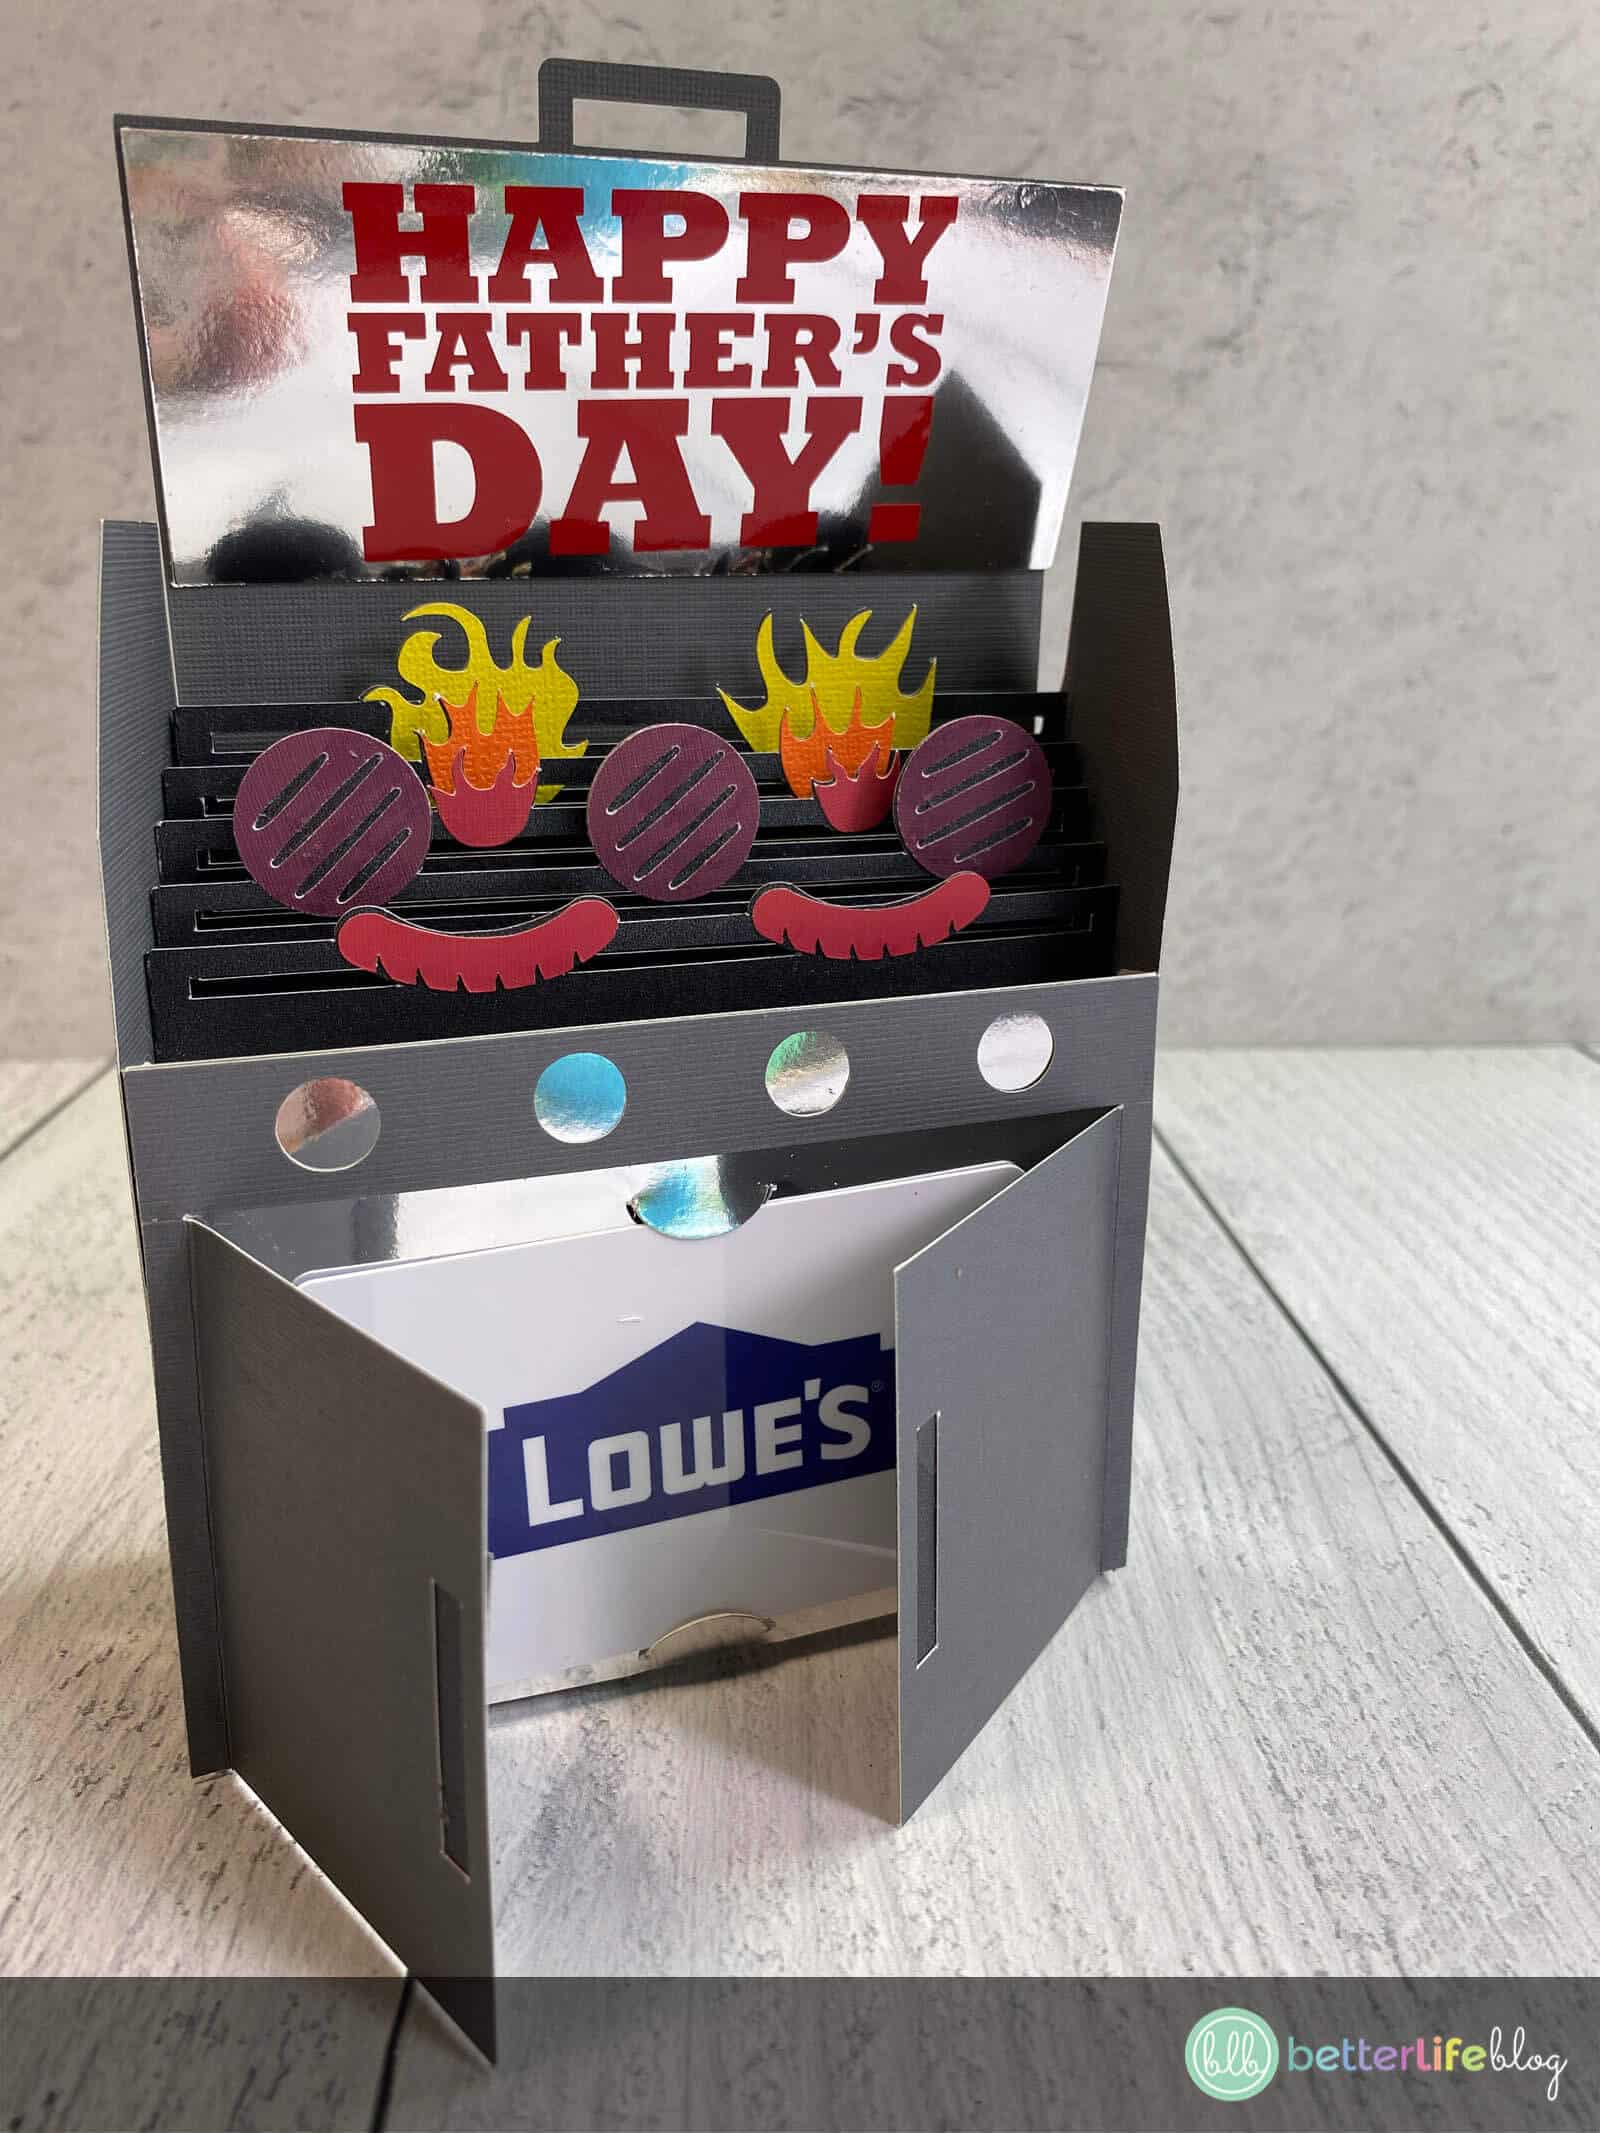 This Pop Up Father’s Day BBQ Card will be a huge hit with dad – and guess what? It’s made using a Cricut machine! Take a look at my step-by-step tutorial so that you can surprise dad with this homemade craft!